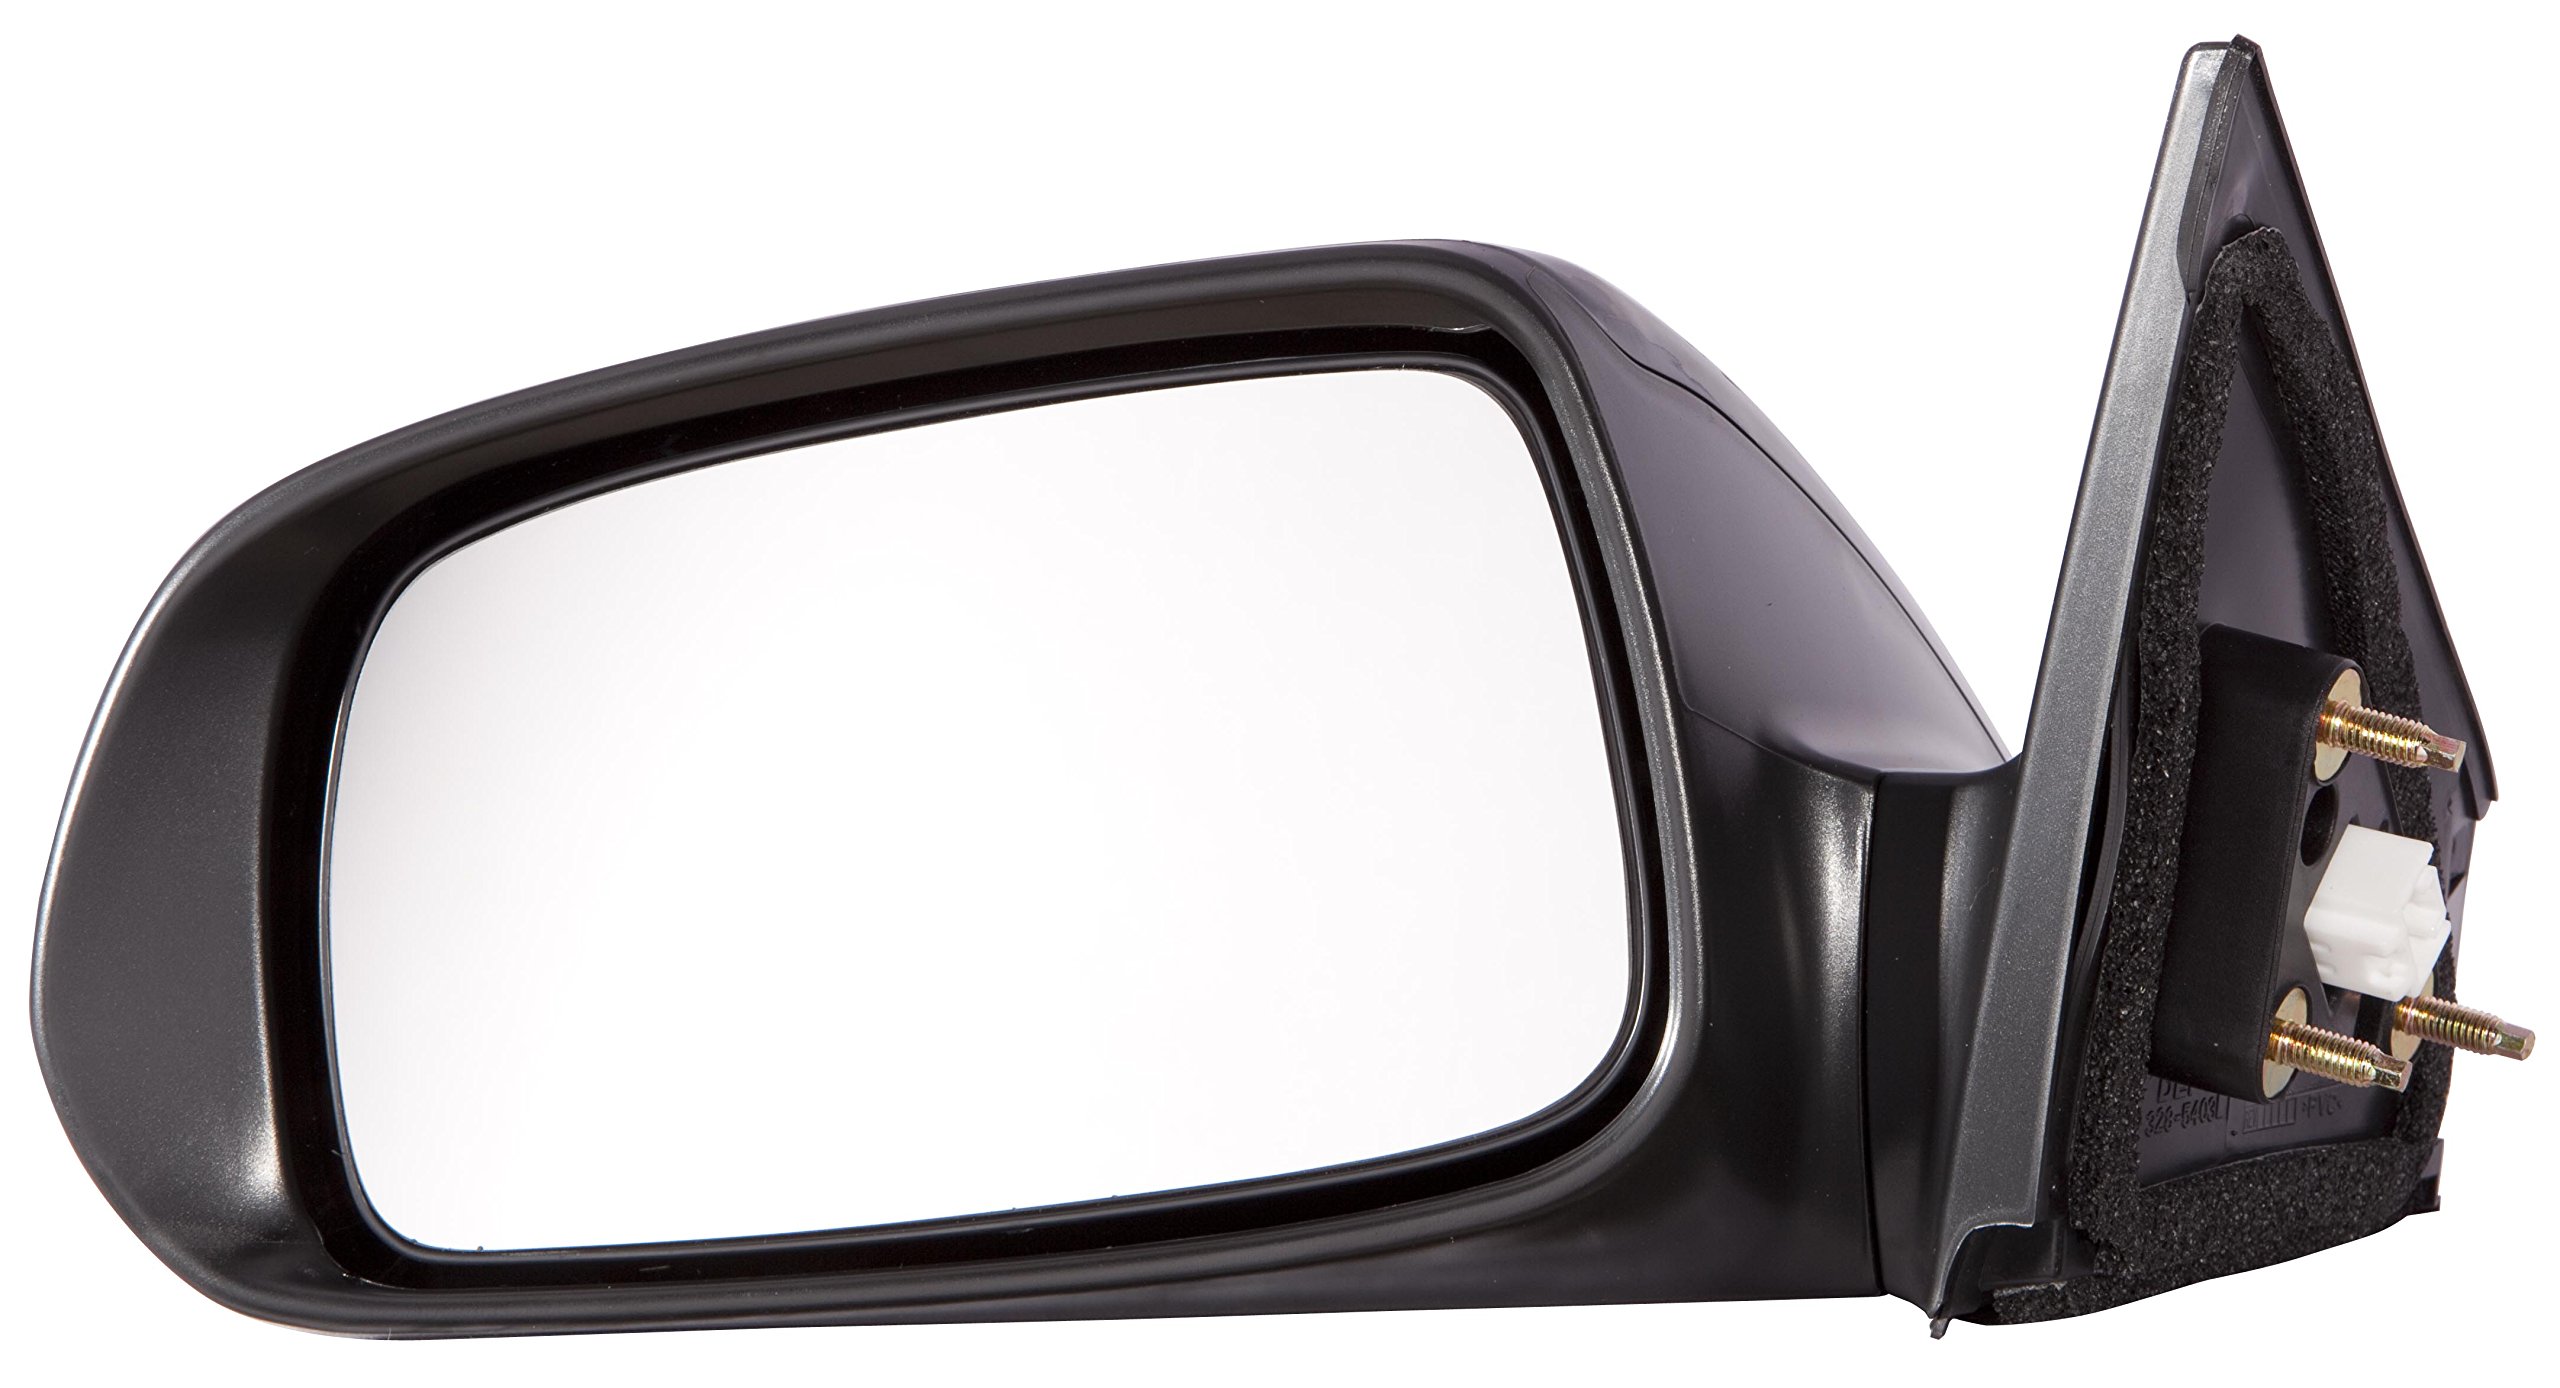 FOCOPO 328-5403L3EB Replacement Driver Side Door Mirror Set (This product is an aftermarket product. It is not created or sold by the OE car company)